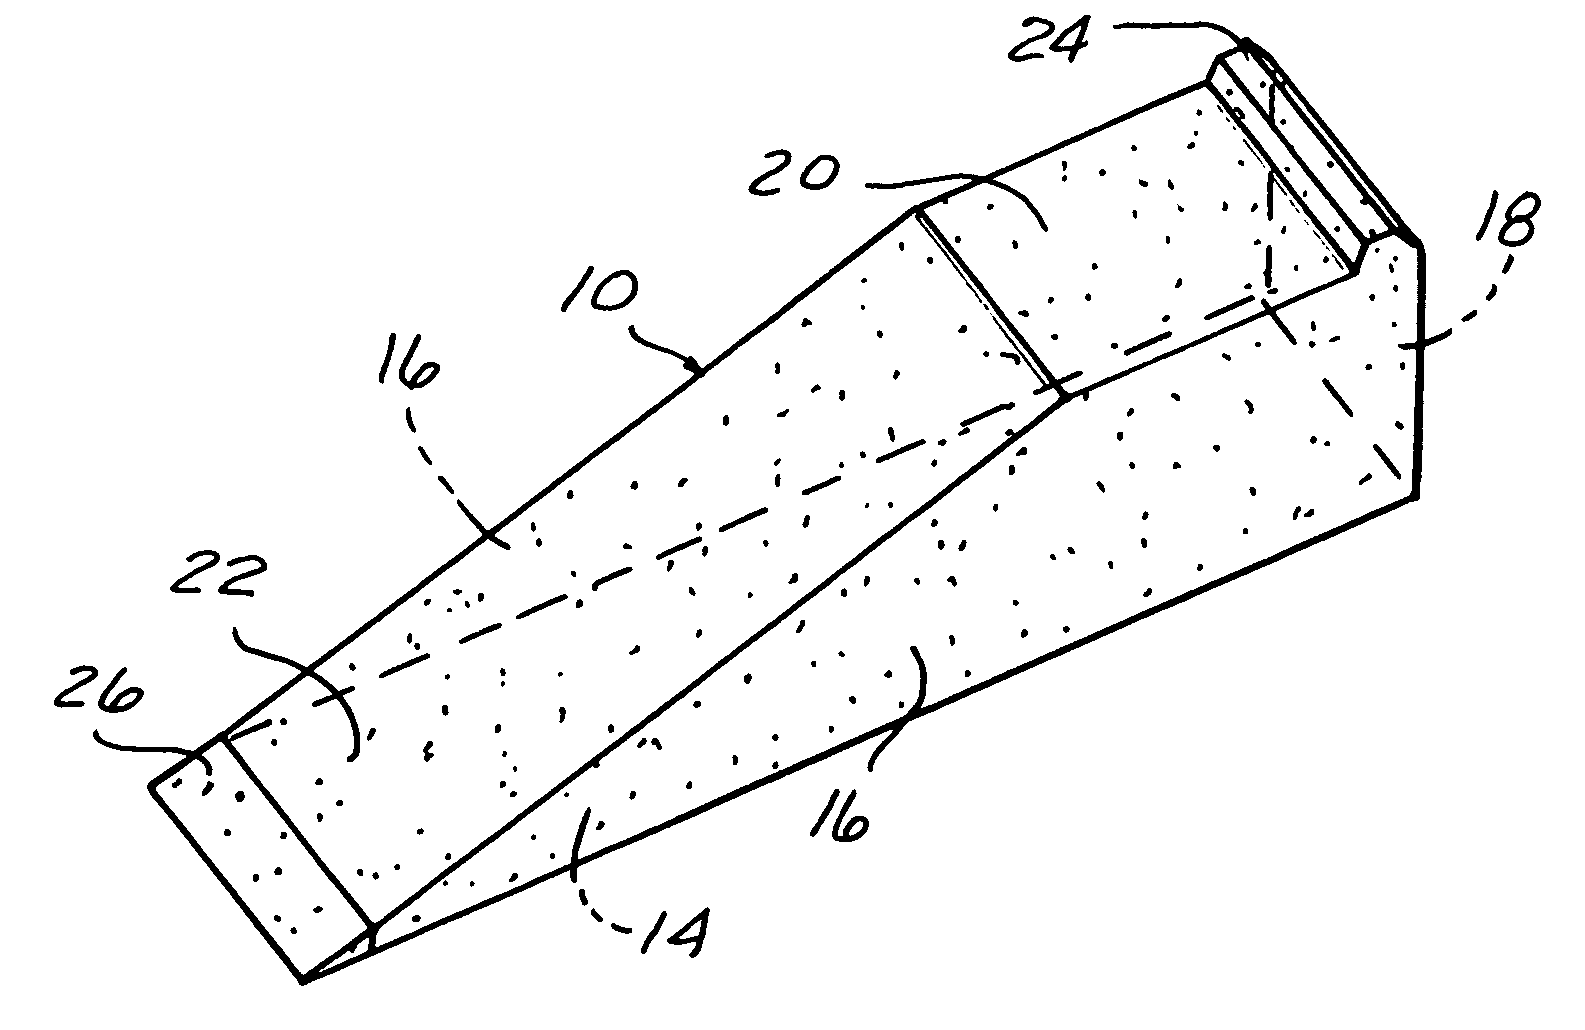 Ramp and method of construction